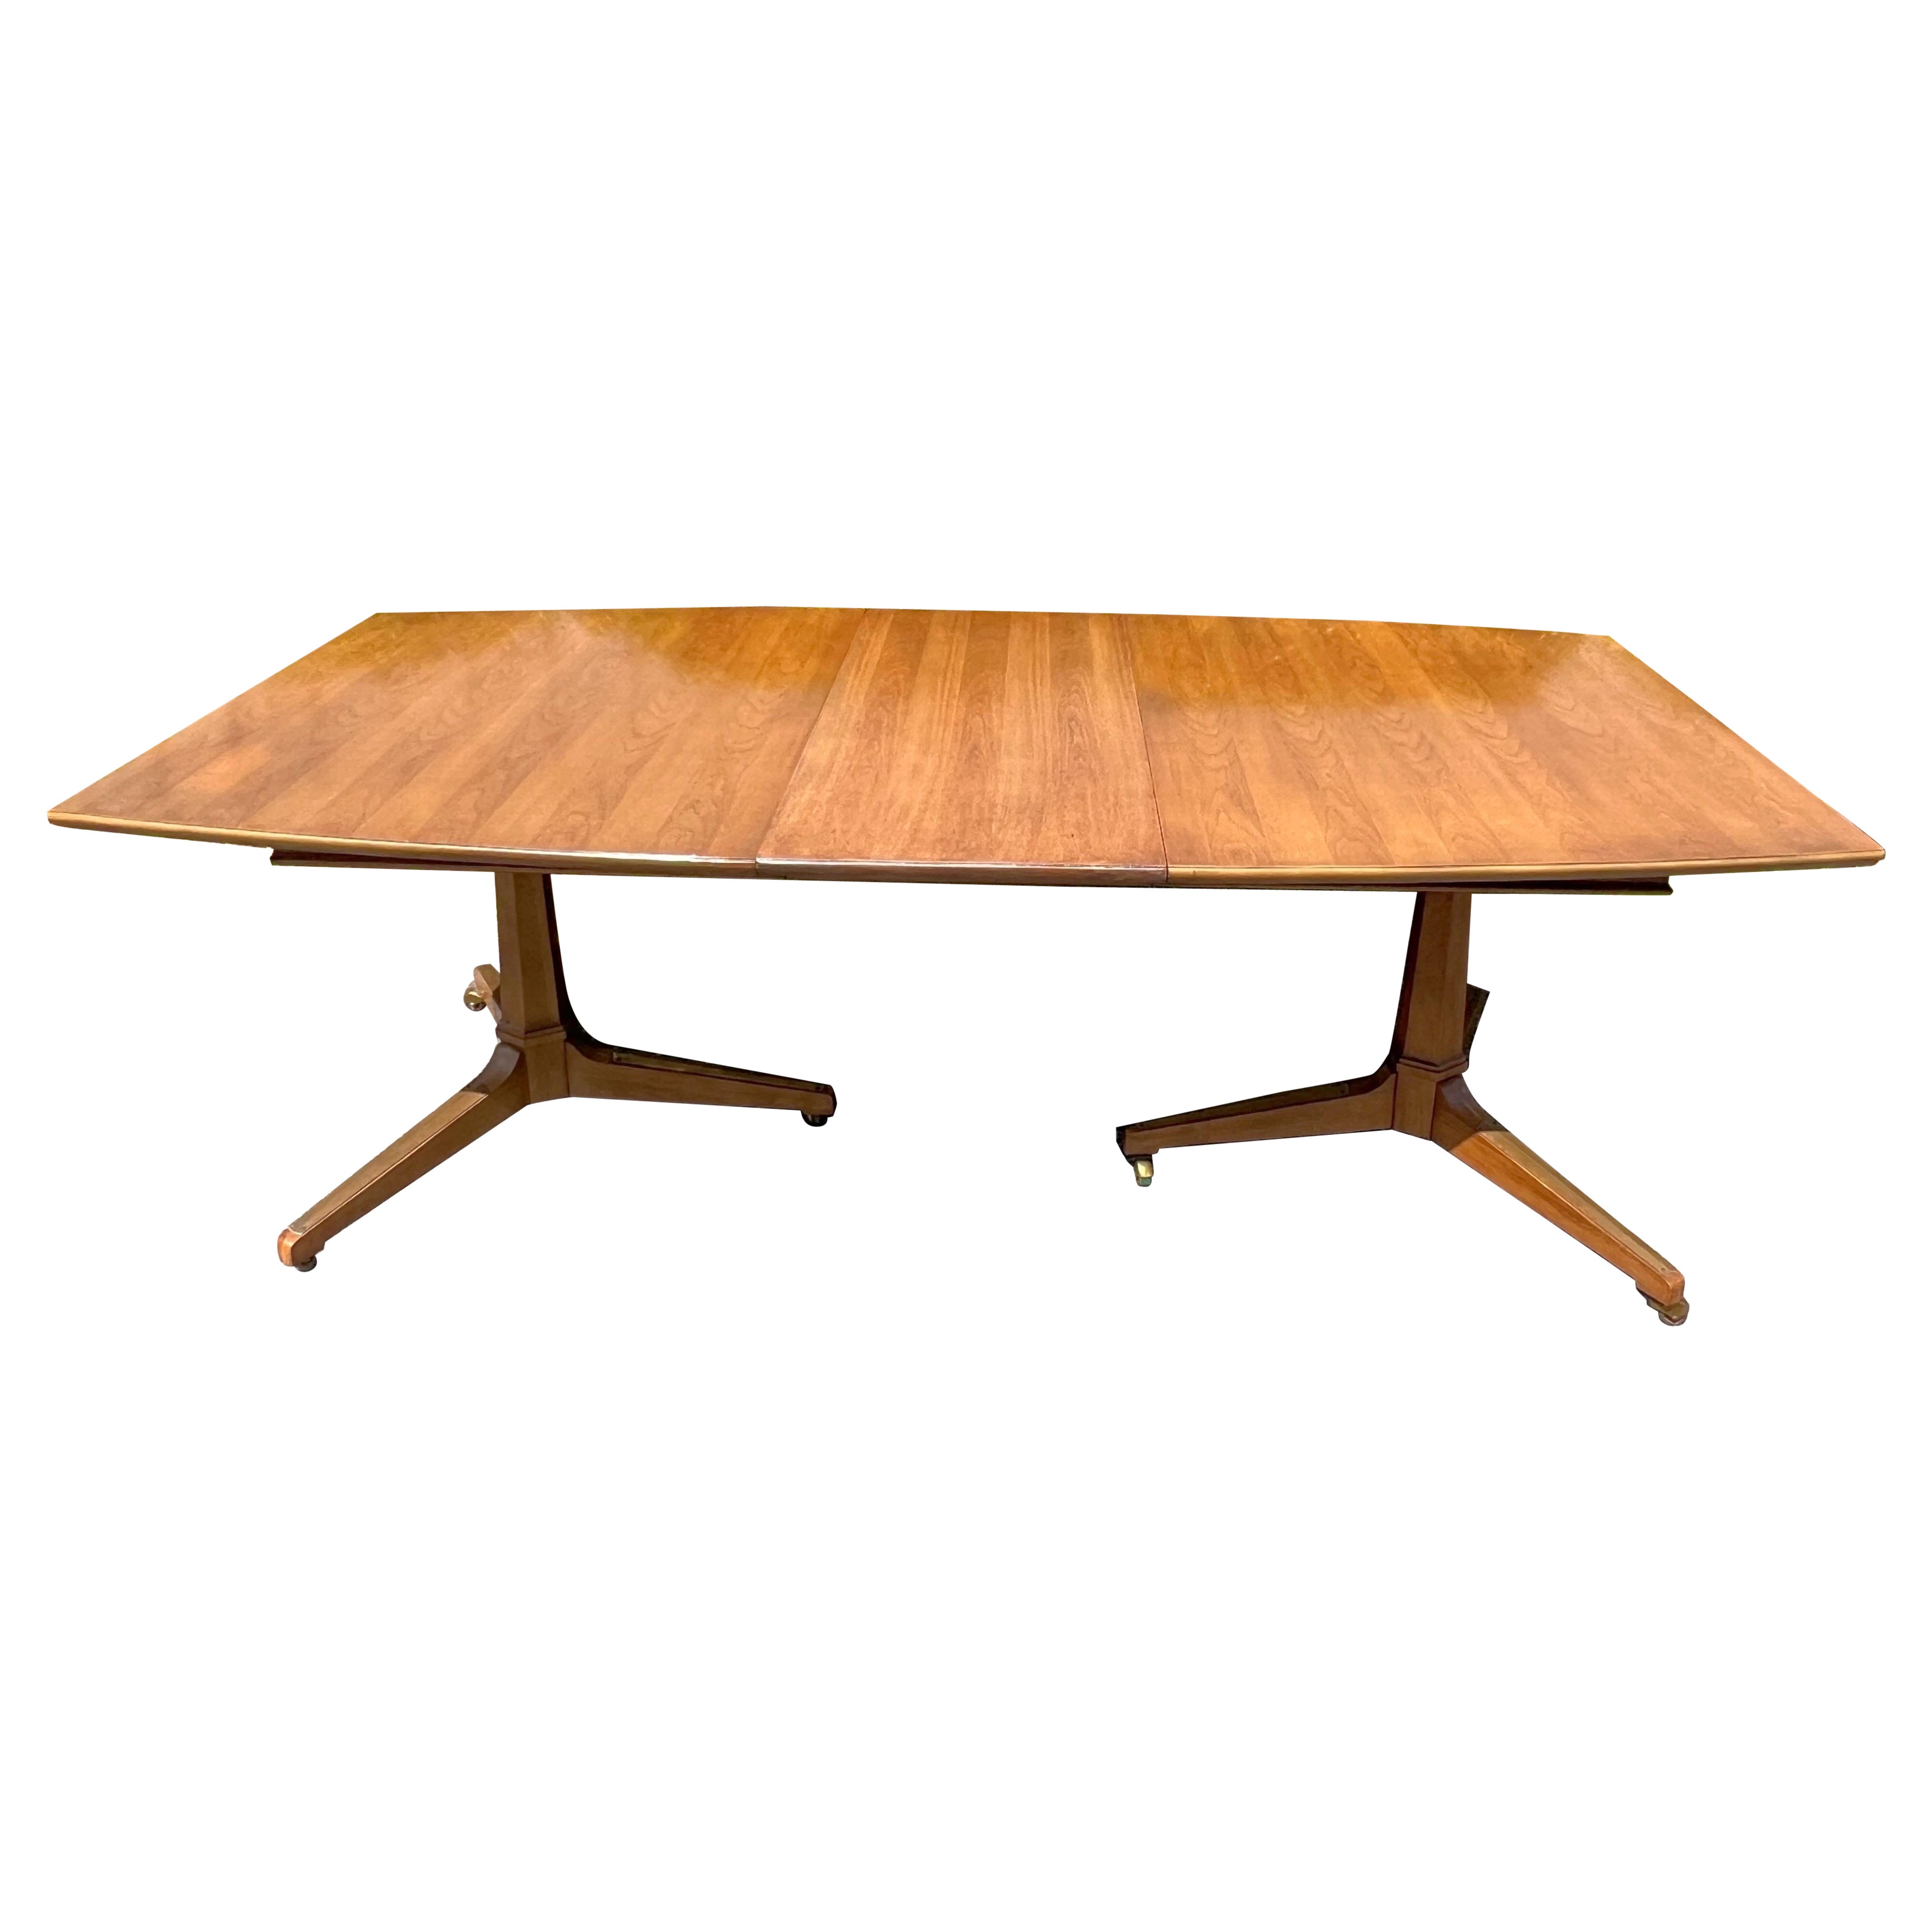 Mid-20th Century Walnut and Brass Dining Table For Sale